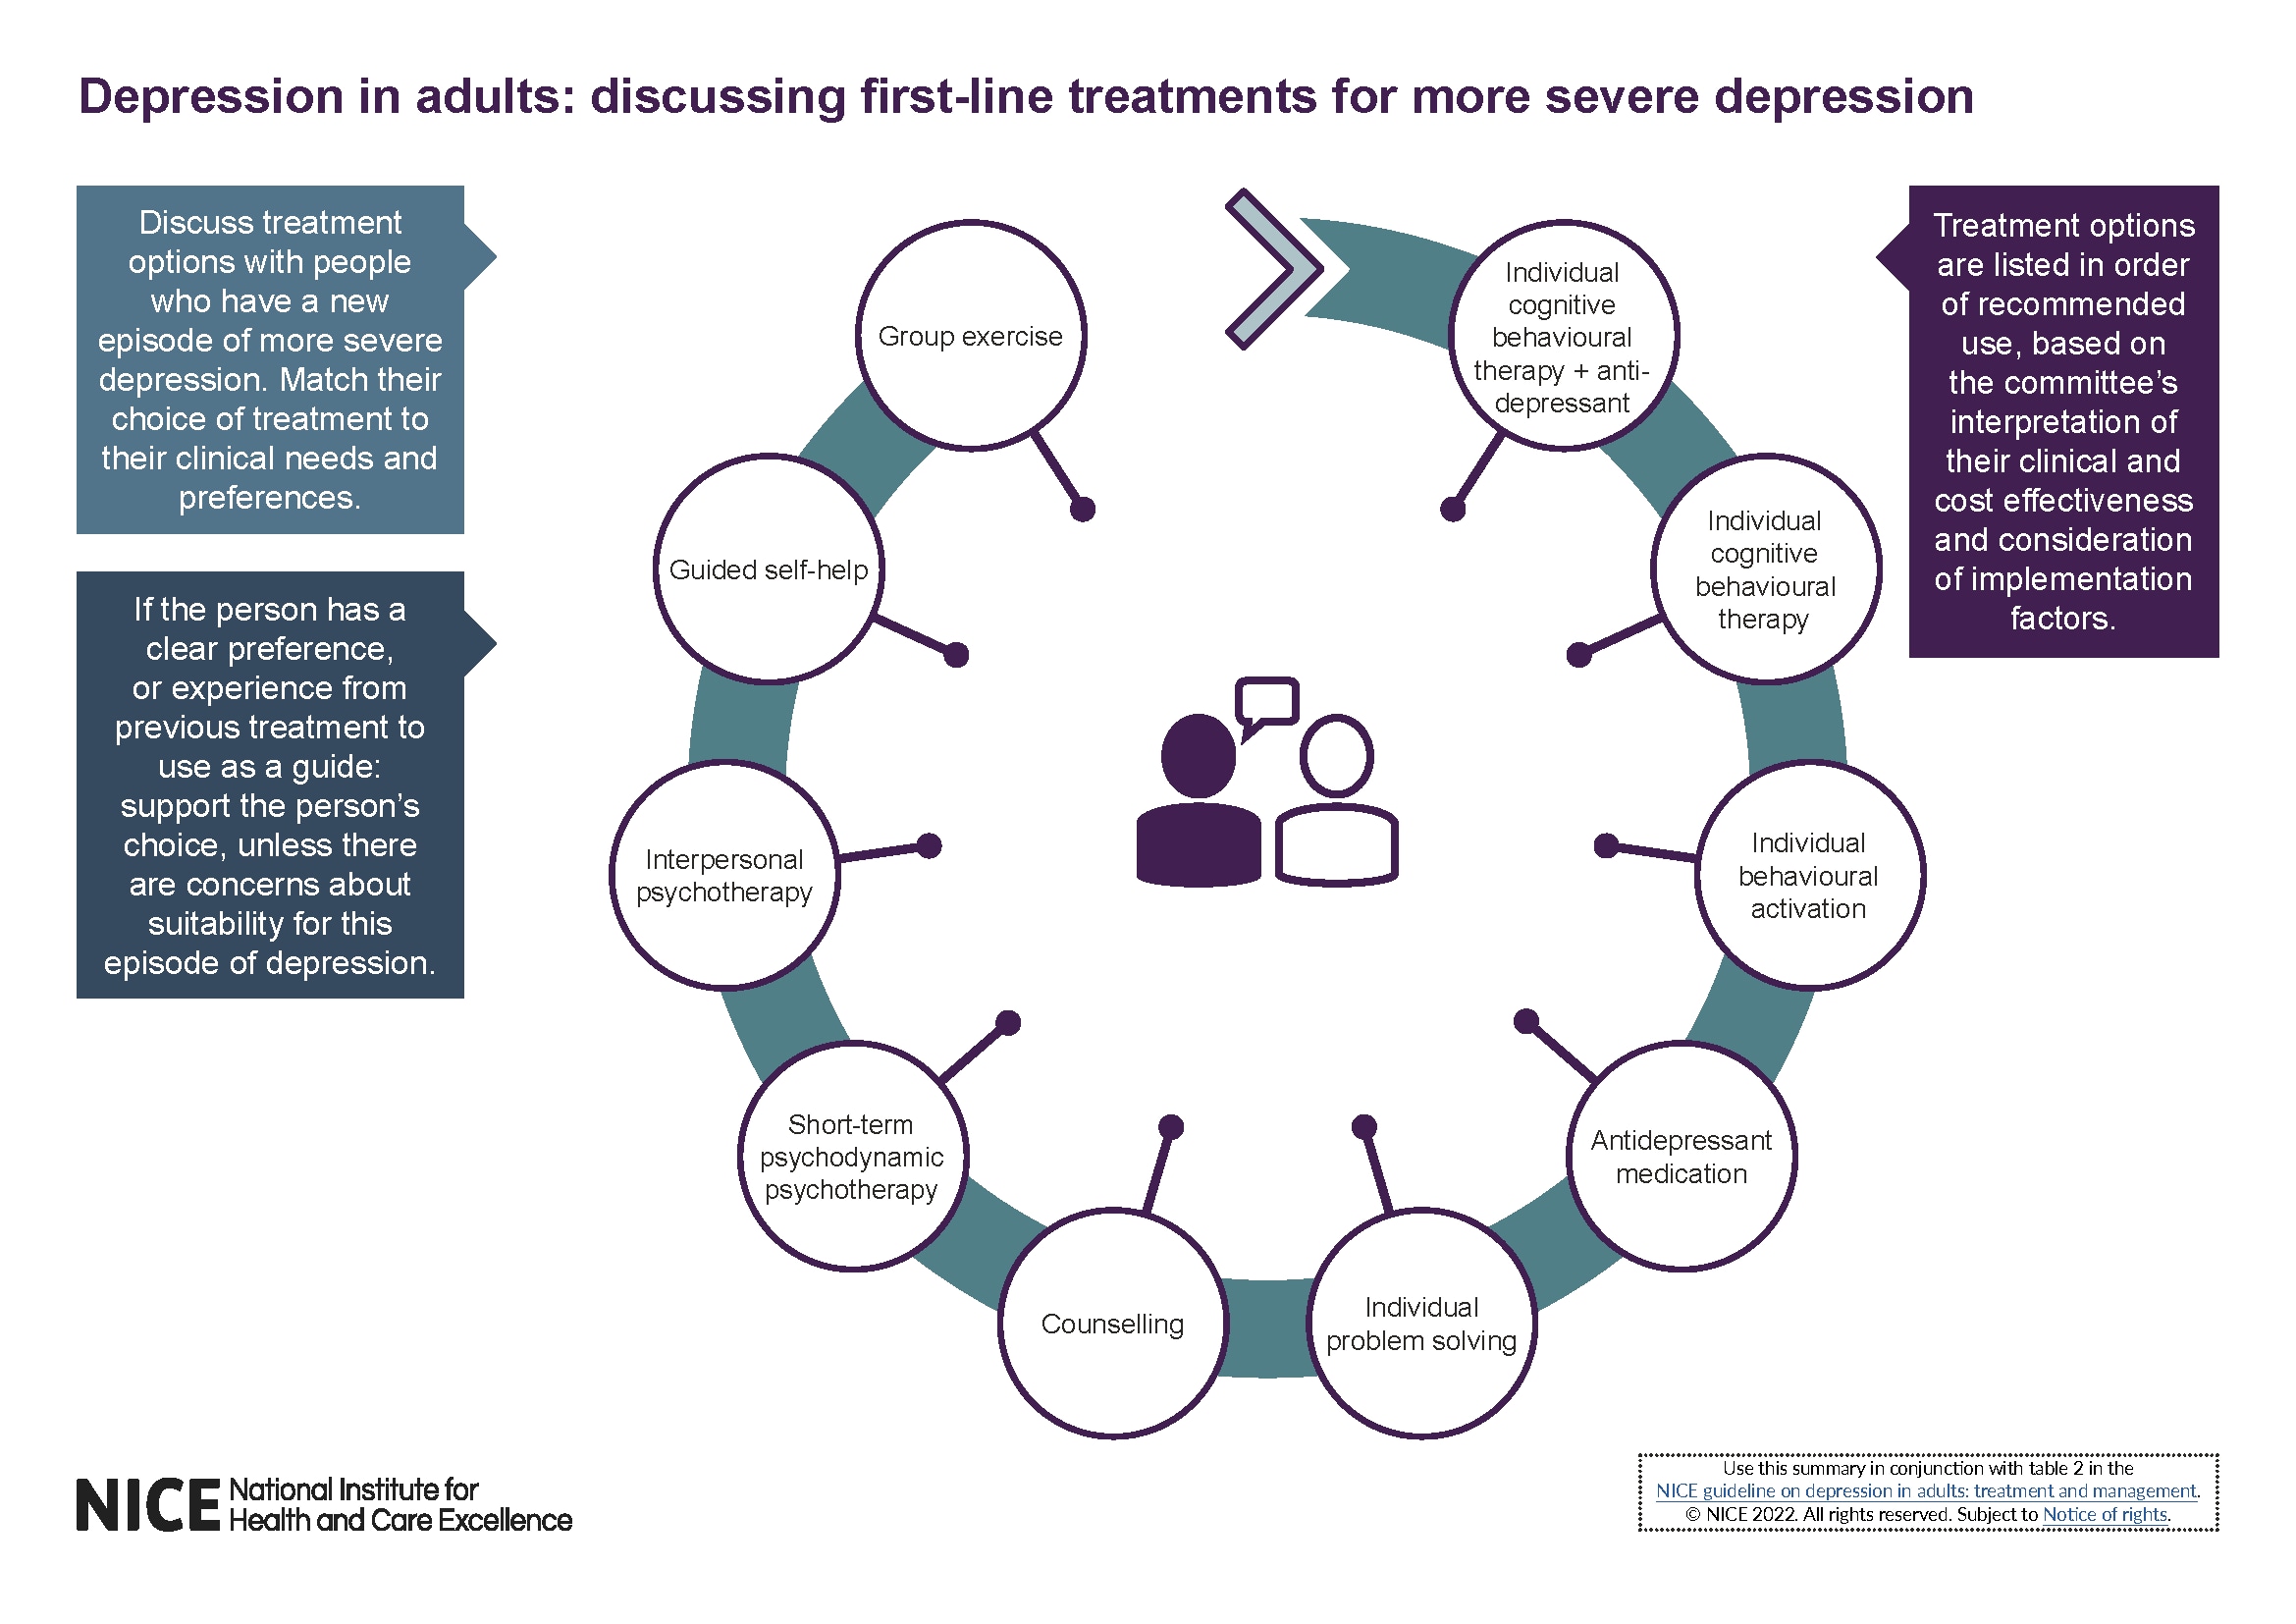 First-line treatments for more severe depression